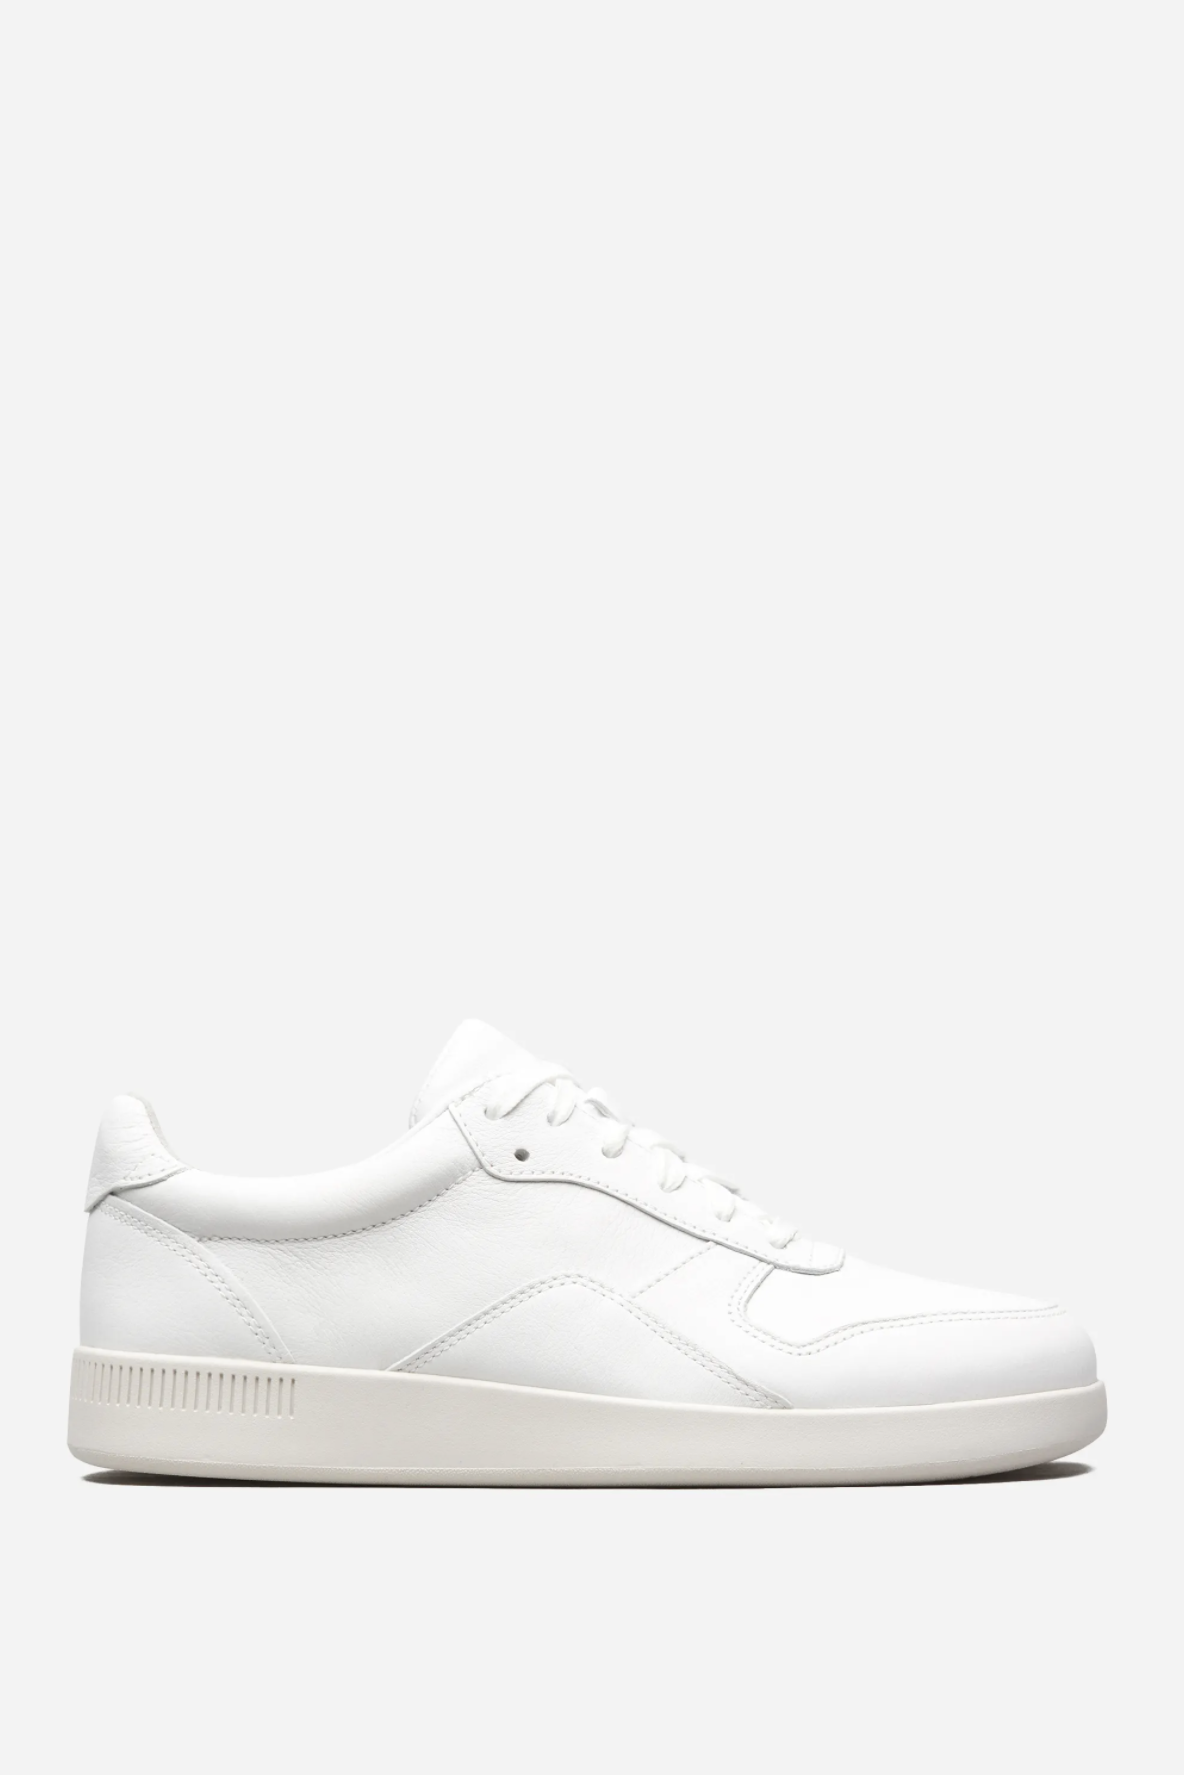 cool all white sneakers